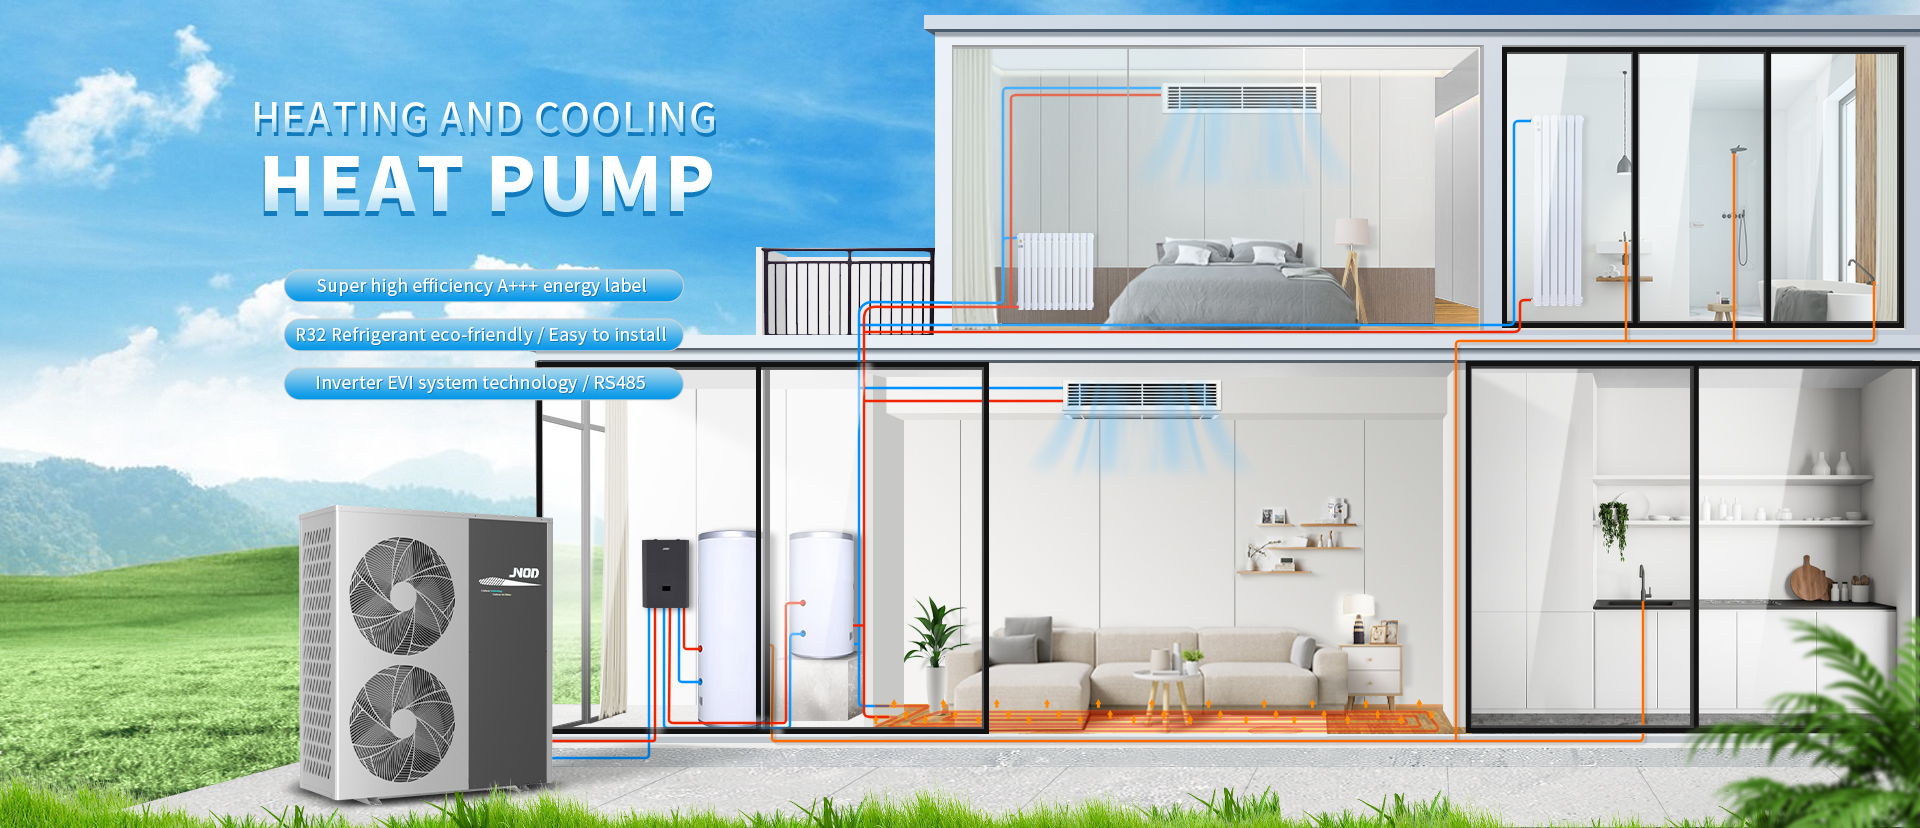 Heating And Cooling Heat Pump company